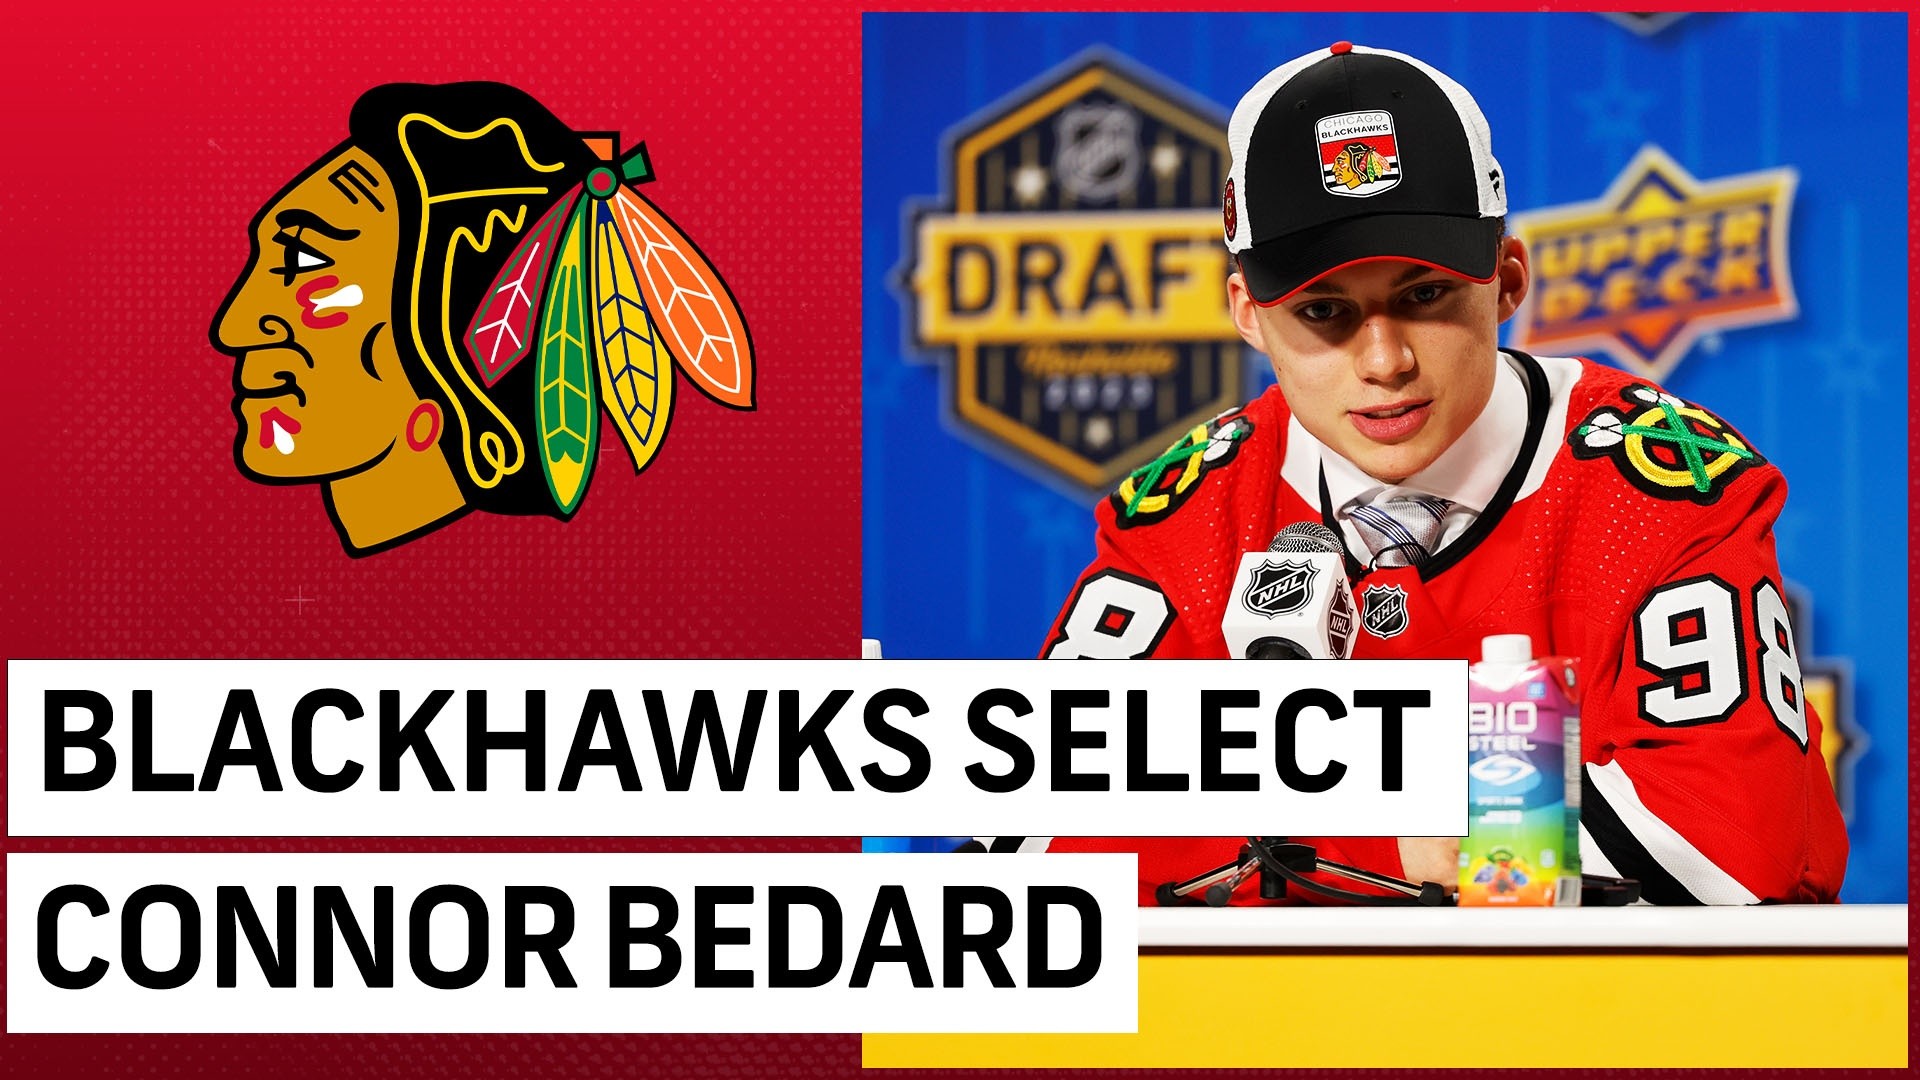 Connor Bedard jerseys are available on NHL website – NBC Sports Chicago